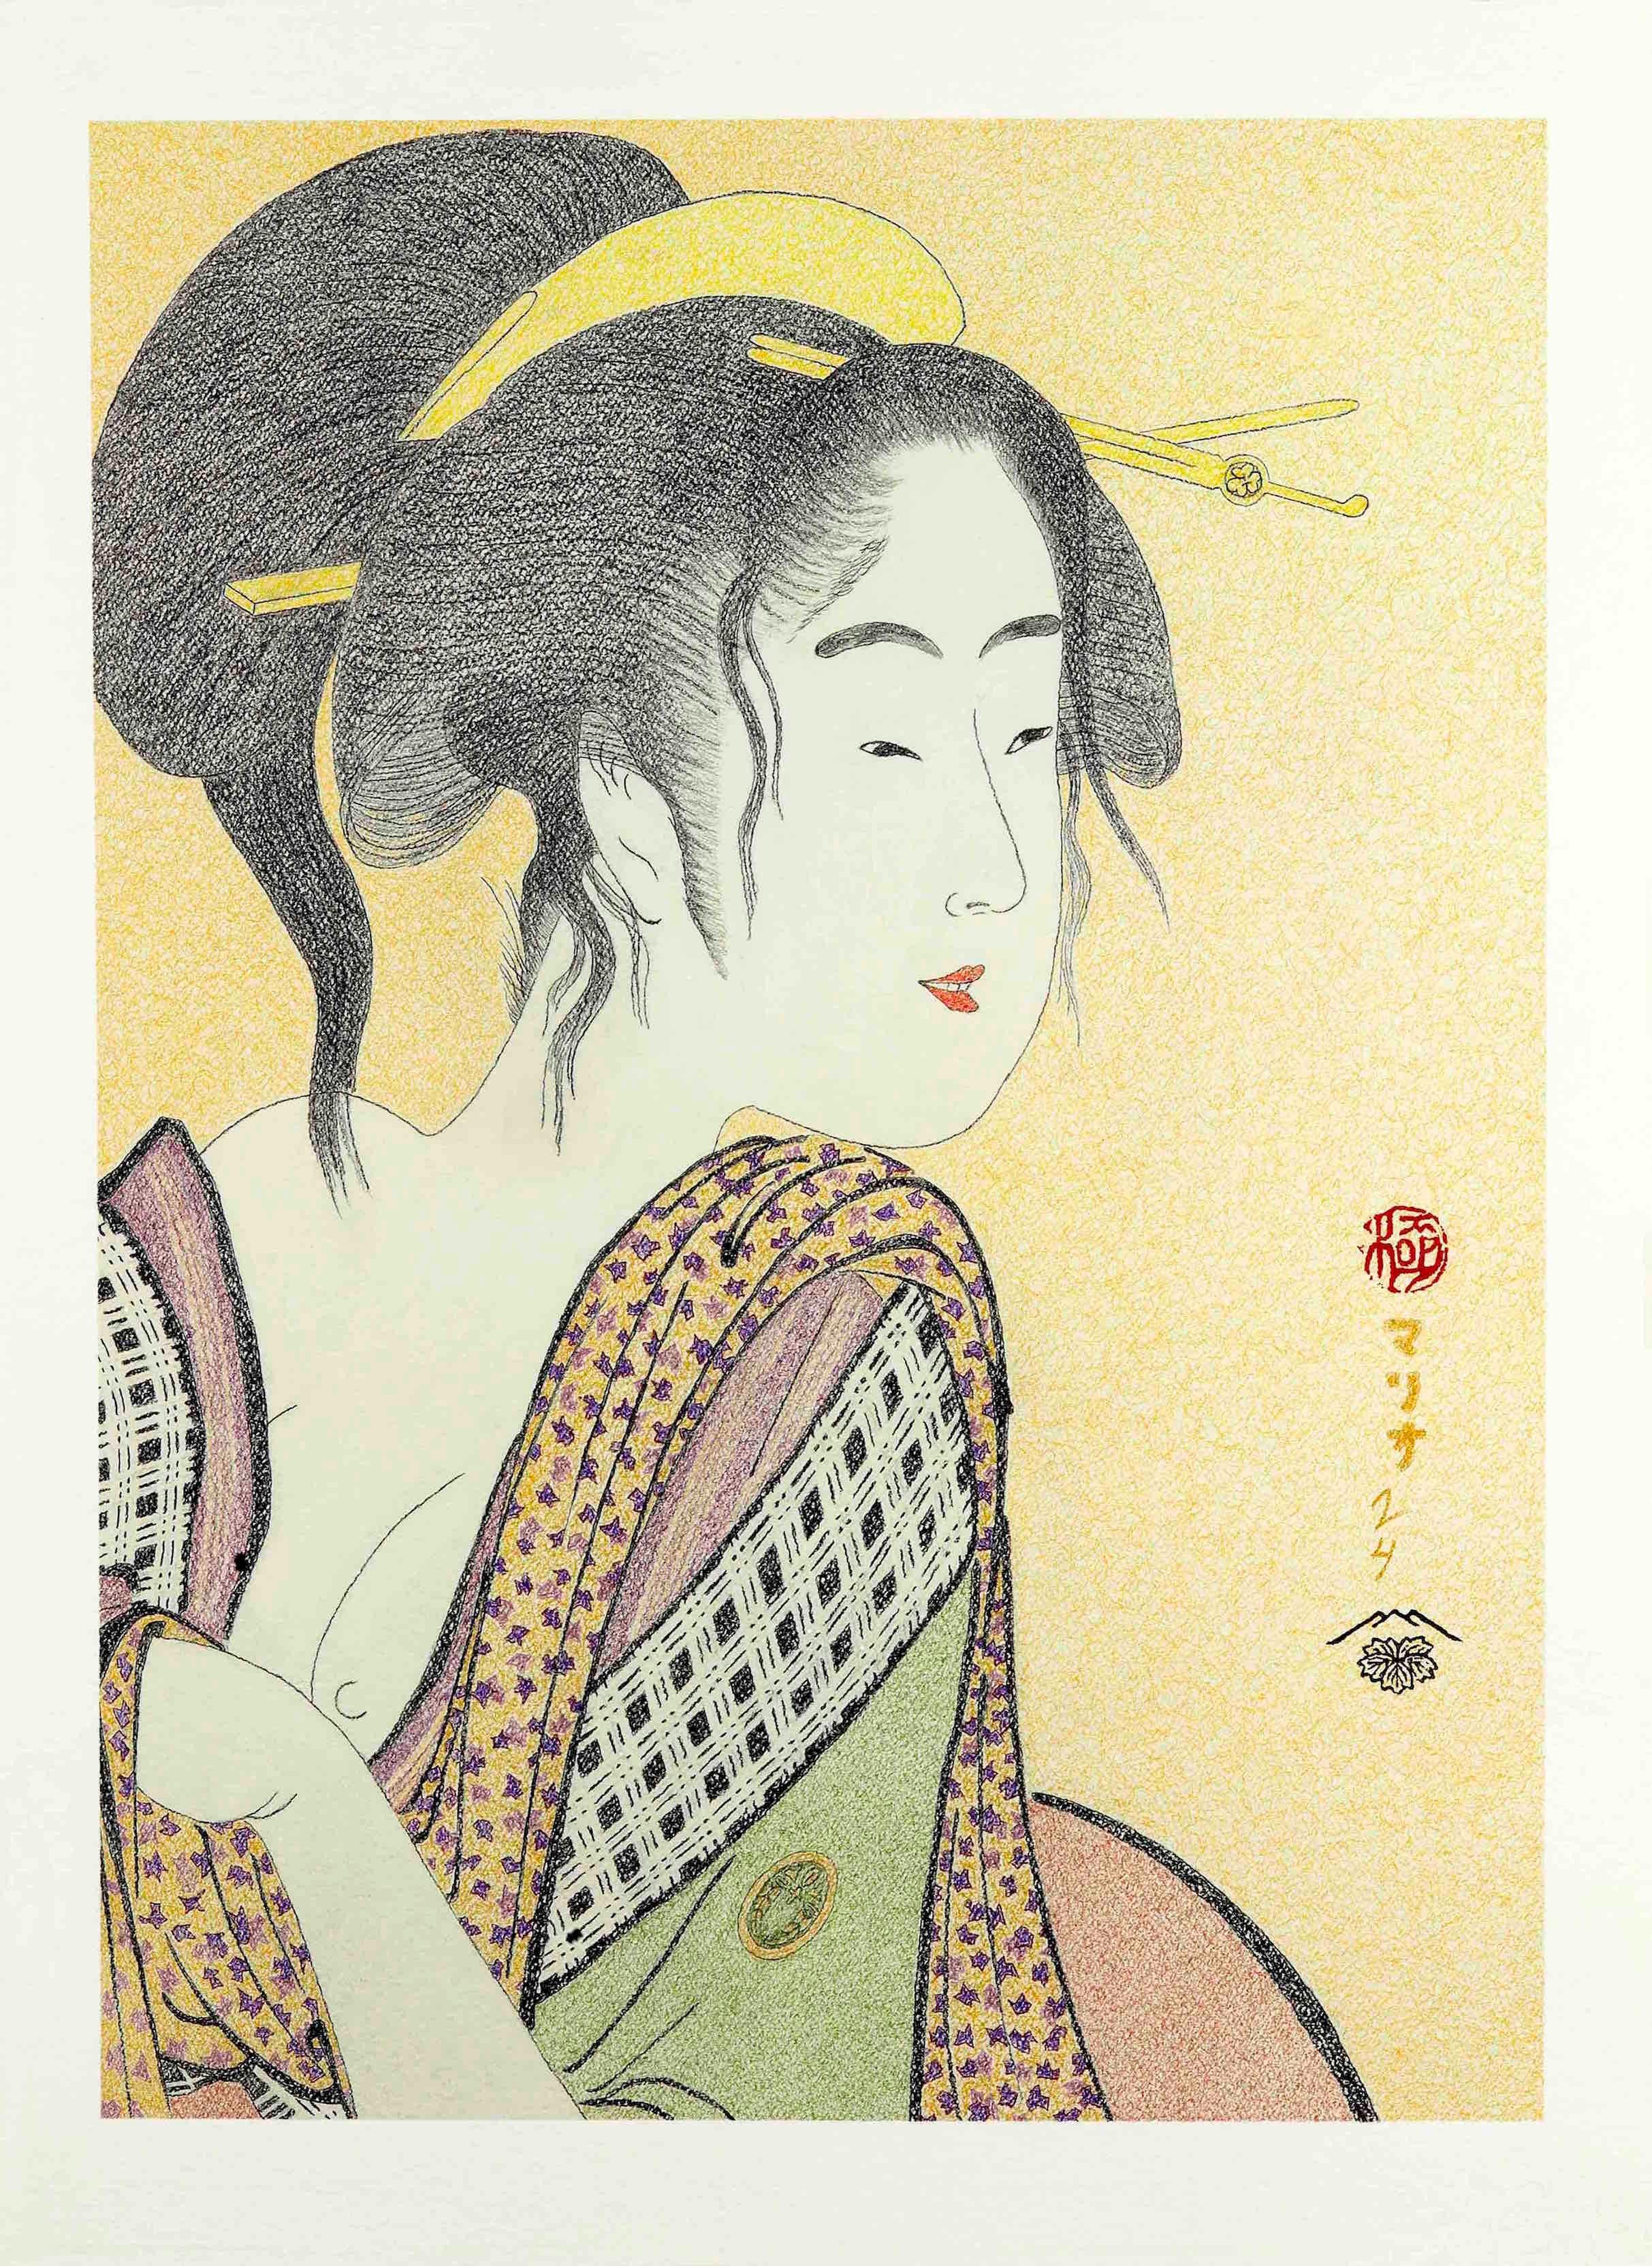 Bijin-ga Series XVII (nº 17)
Title: Love for a farmer´s wife

Sensual portrait of a young and beautiful farmer´s wife. Her cheerful and careless gesture, showing her chest between the open folds of the neckline of his humble dress; the strands of